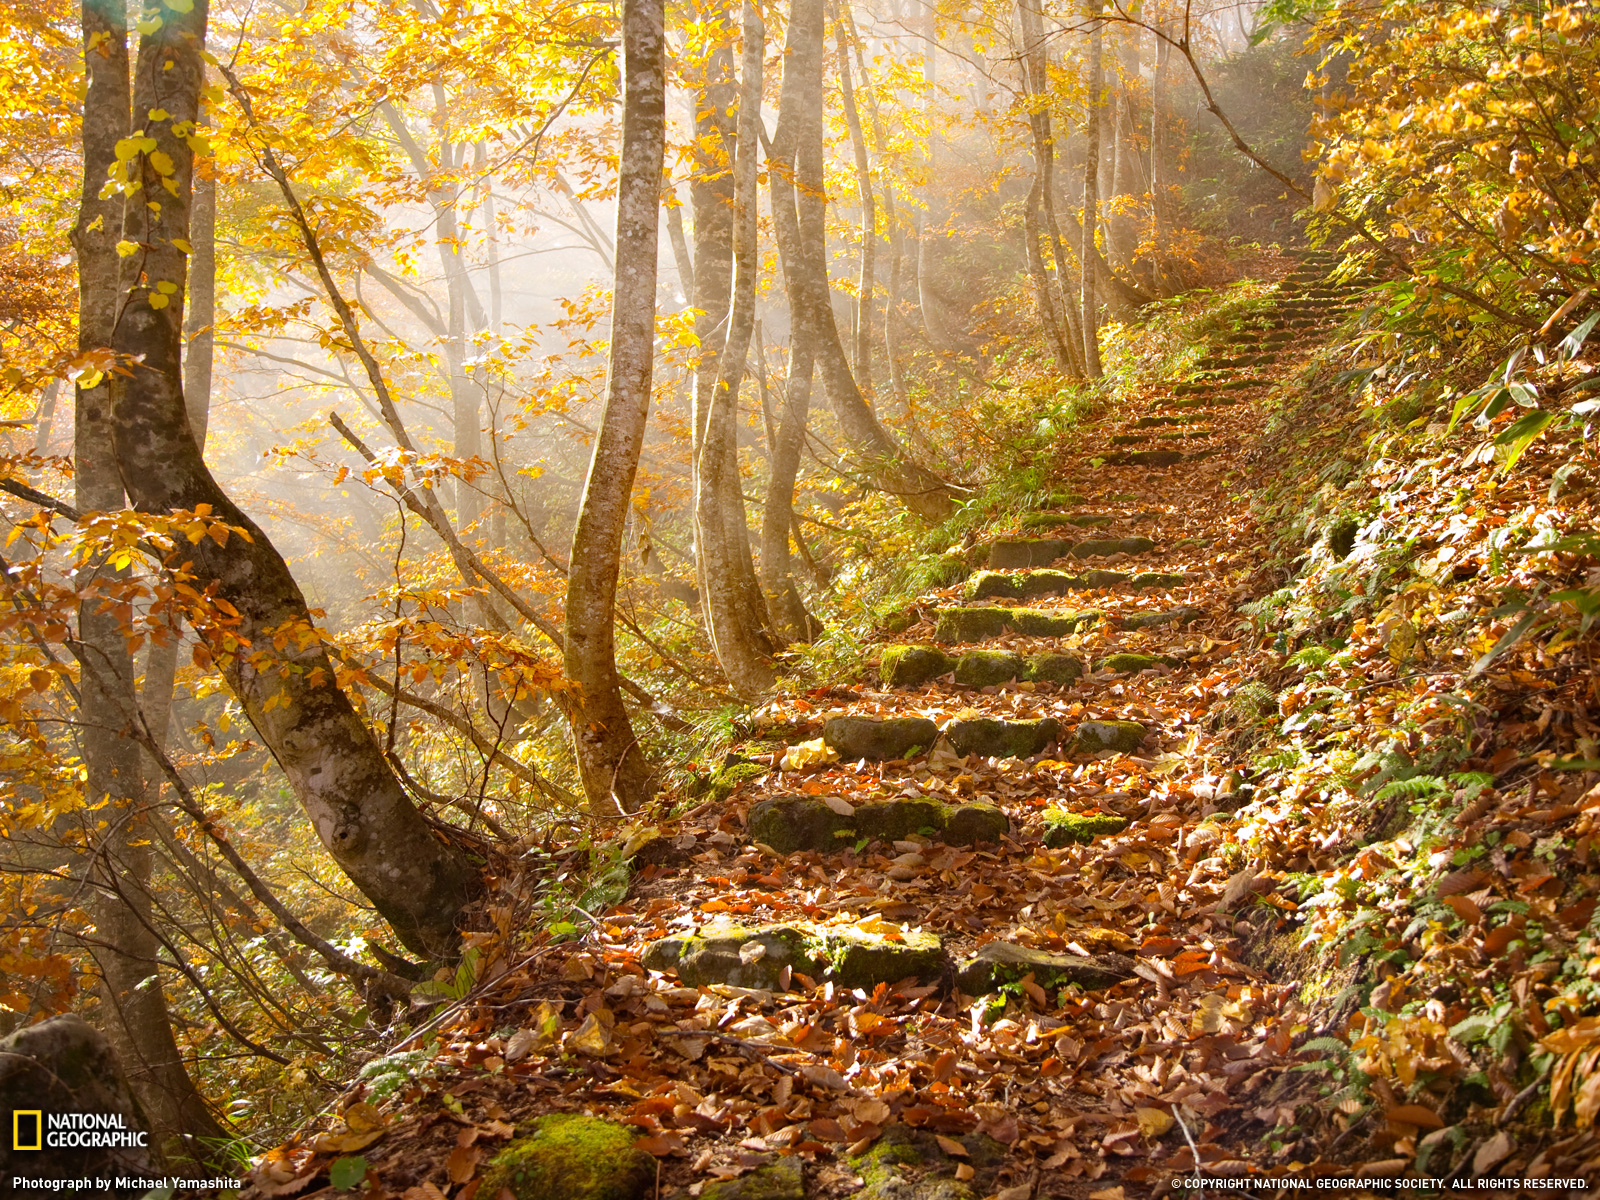 Autumn Leaves Photo Nature Wallpaper National Geographic Photo of